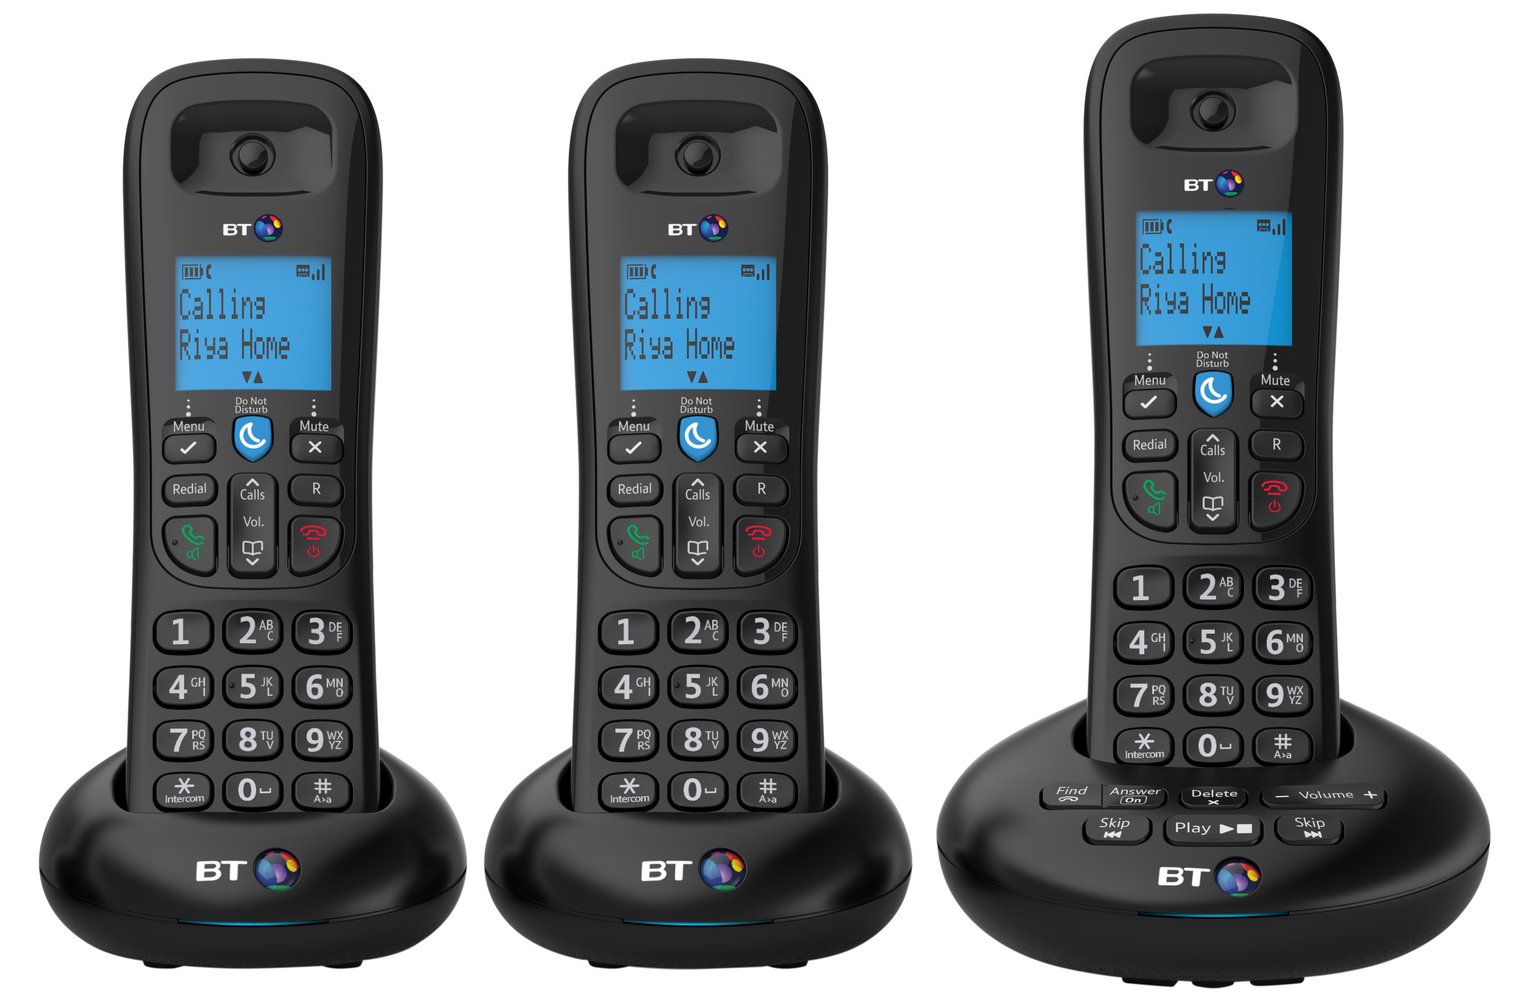 BT 3570 Cordless Telephone with Answer Machine - Triple